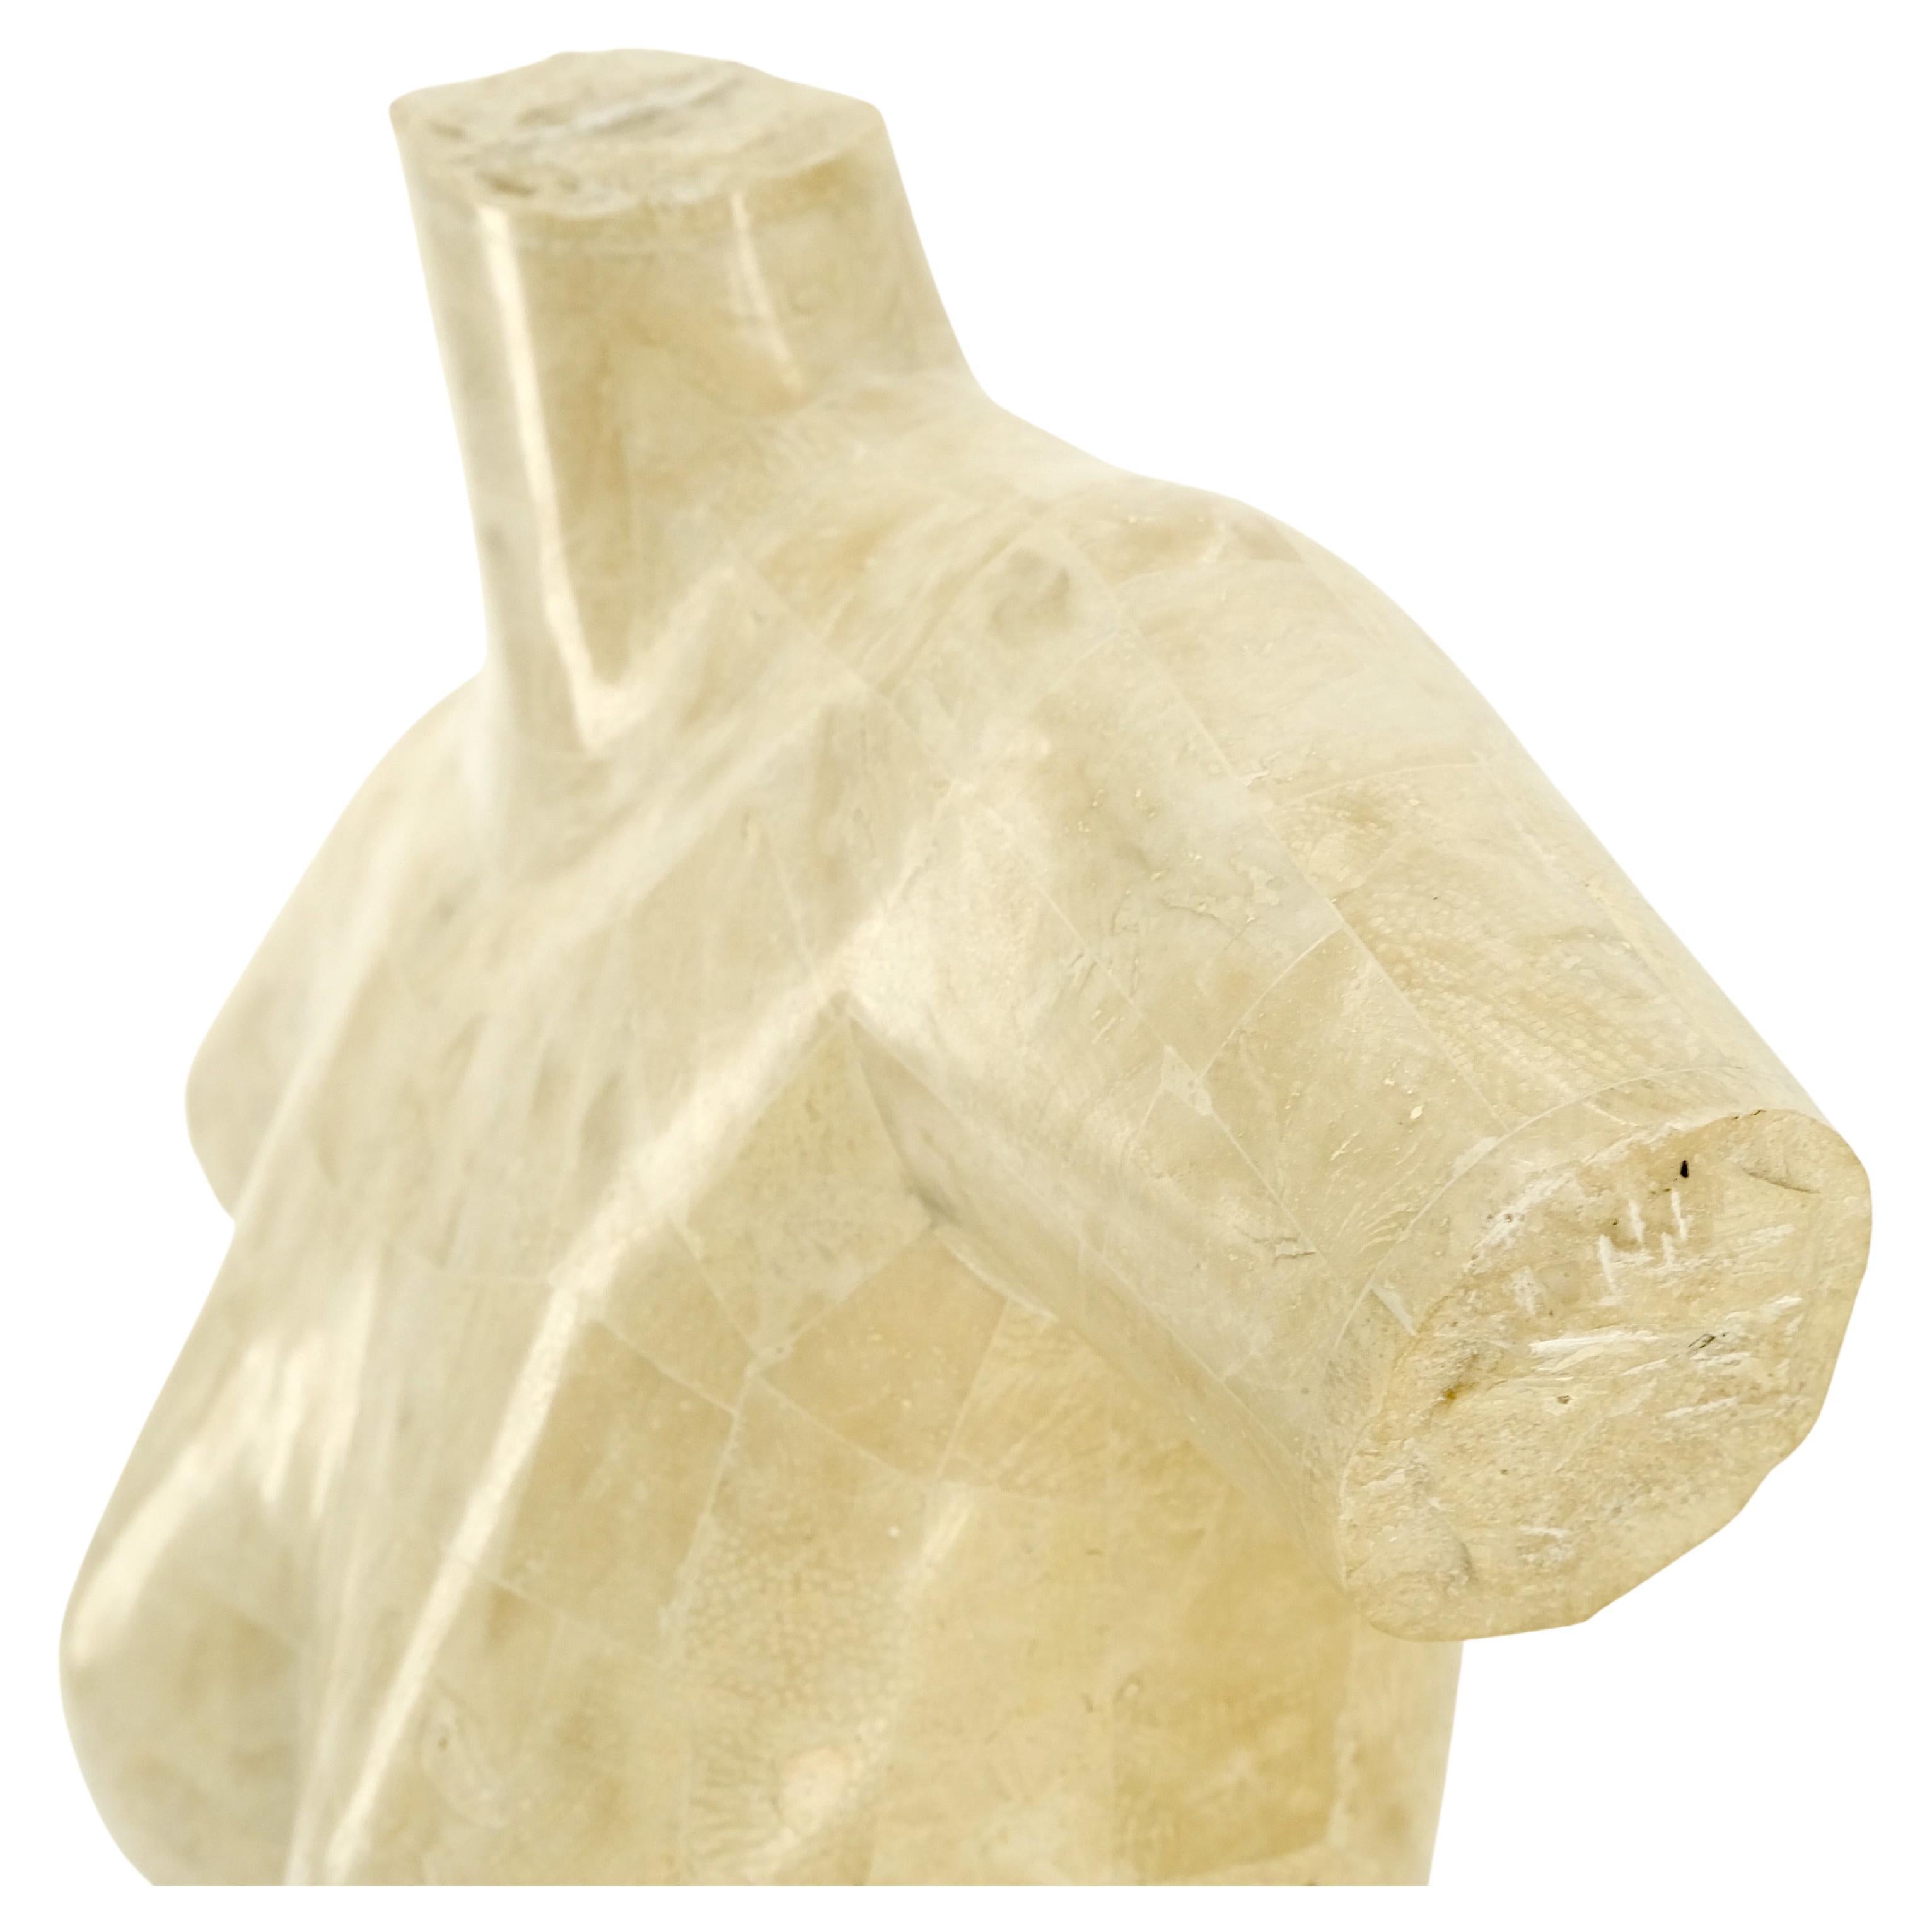 Tessellated Stone Marble Travertine Sculpture of Nude Female Torso Mint! For Sale 10